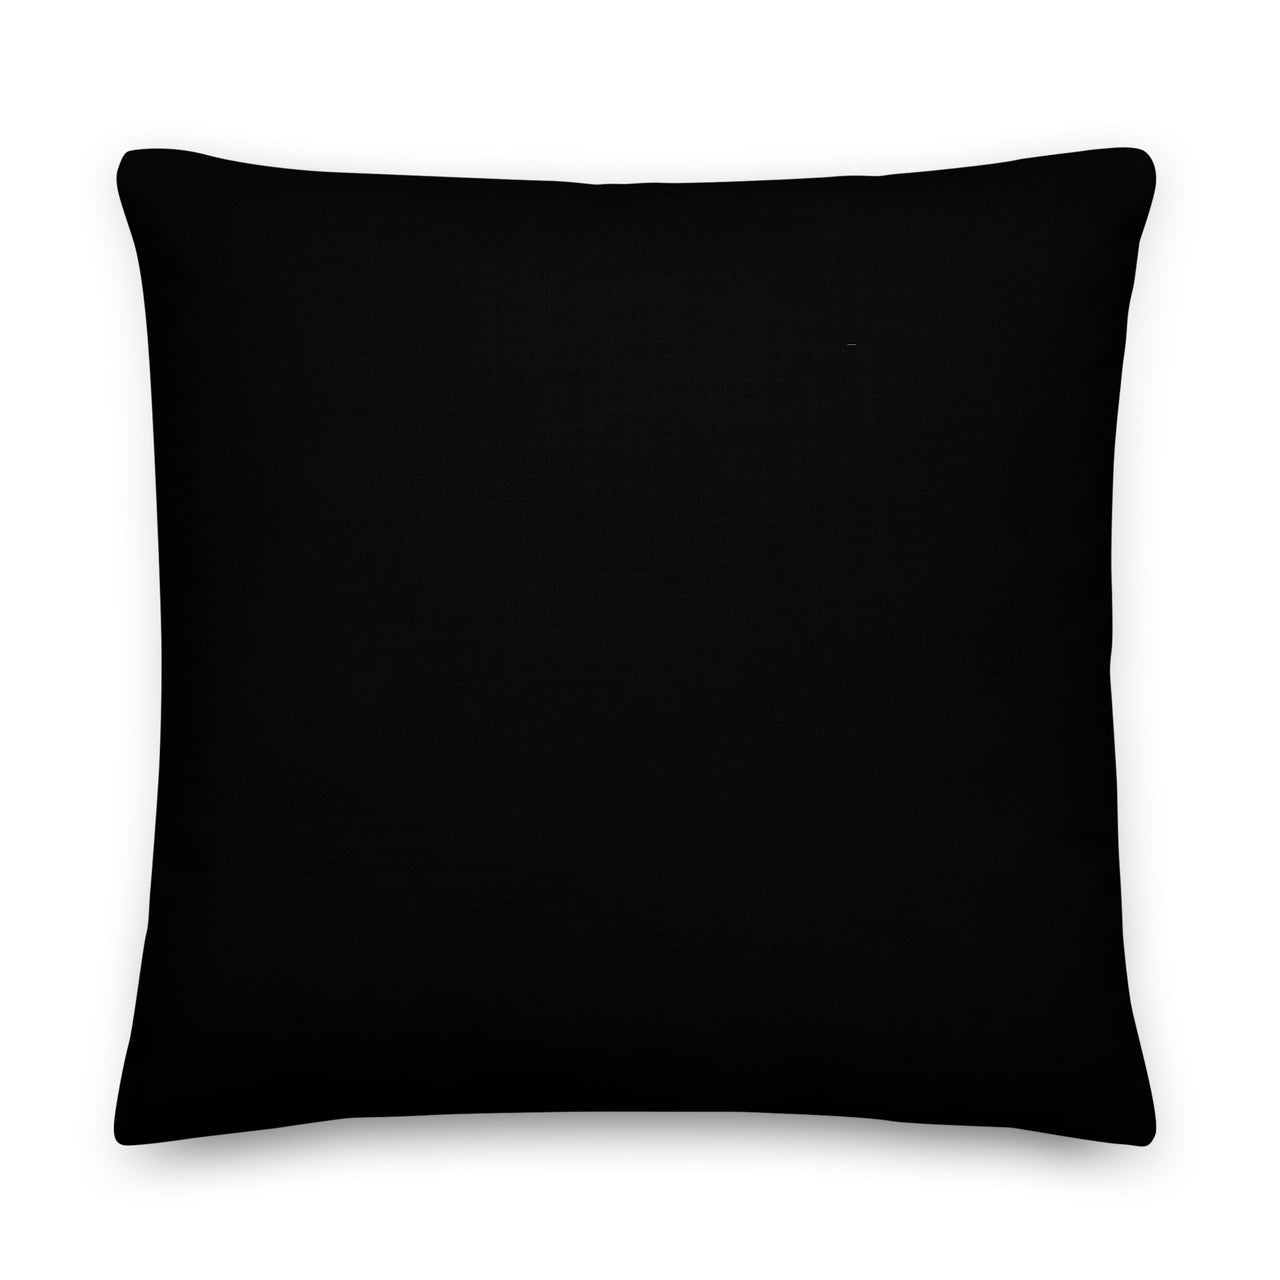 I Fucking Love You Premium Linen-Feel Pillow A Bold Statement for Any Boudoir